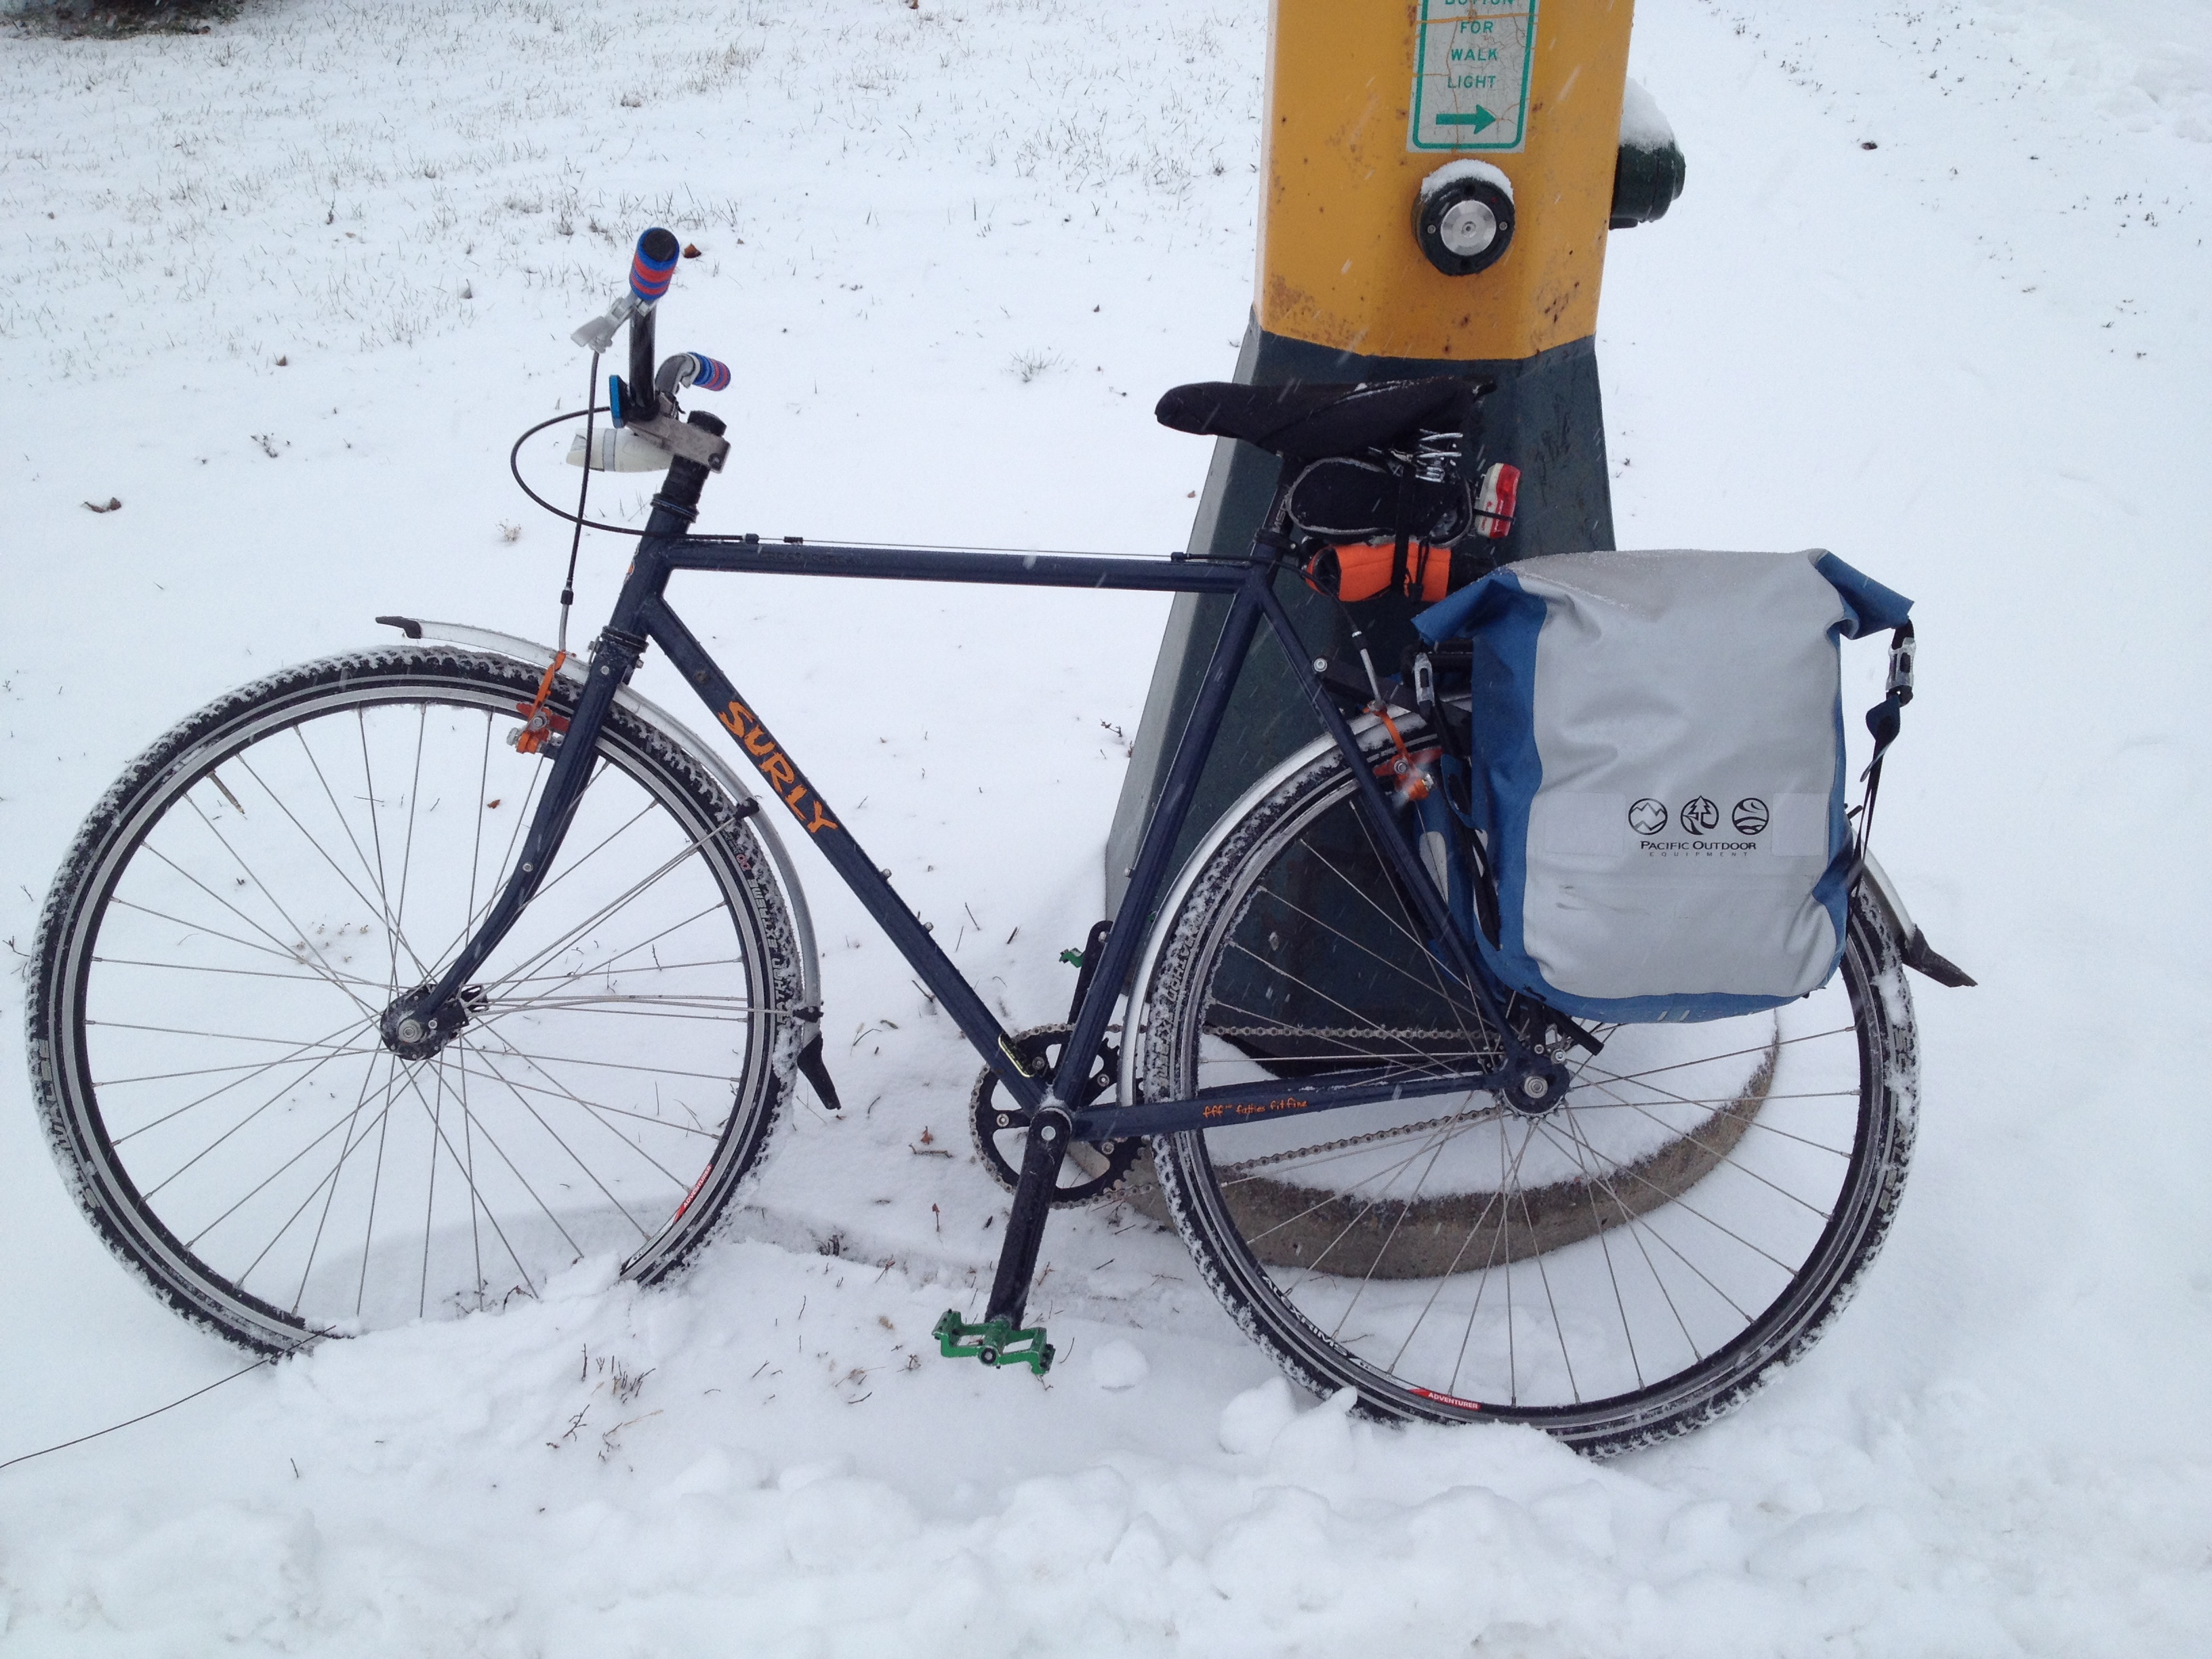 Left side view of a Surly bike, standing in snow, leaning against the base of a traffic light pole